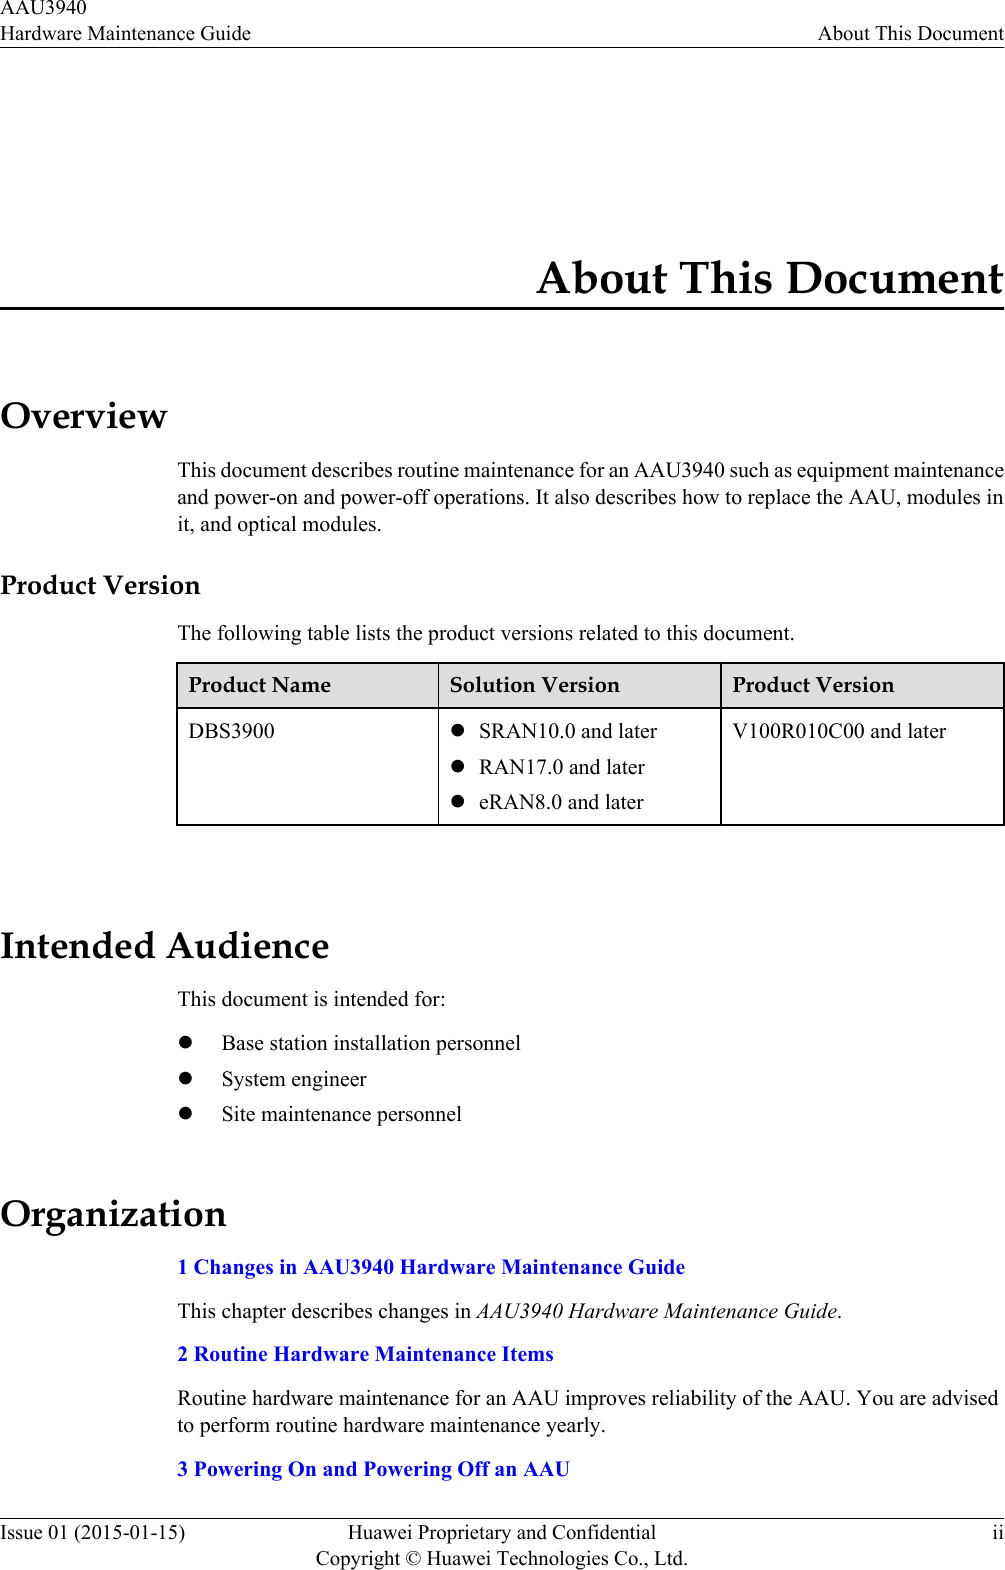 About This DocumentOverviewThis document describes routine maintenance for an AAU3940 such as equipment maintenanceand power-on and power-off operations. It also describes how to replace the AAU, modules init, and optical modules.Product VersionThe following table lists the product versions related to this document.Product Name Solution Version Product VersionDBS3900 lSRAN10.0 and laterlRAN17.0 and laterleRAN8.0 and laterV100R010C00 and later Intended AudienceThis document is intended for:lBase station installation personnellSystem engineerlSite maintenance personnelOrganization1 Changes in AAU3940 Hardware Maintenance GuideThis chapter describes changes in AAU3940 Hardware Maintenance Guide.2 Routine Hardware Maintenance ItemsRoutine hardware maintenance for an AAU improves reliability of the AAU. You are advisedto perform routine hardware maintenance yearly.3 Powering On and Powering Off an AAUAAU3940Hardware Maintenance Guide About This DocumentIssue 01 (2015-01-15) Huawei Proprietary and ConfidentialCopyright © Huawei Technologies Co., Ltd.ii